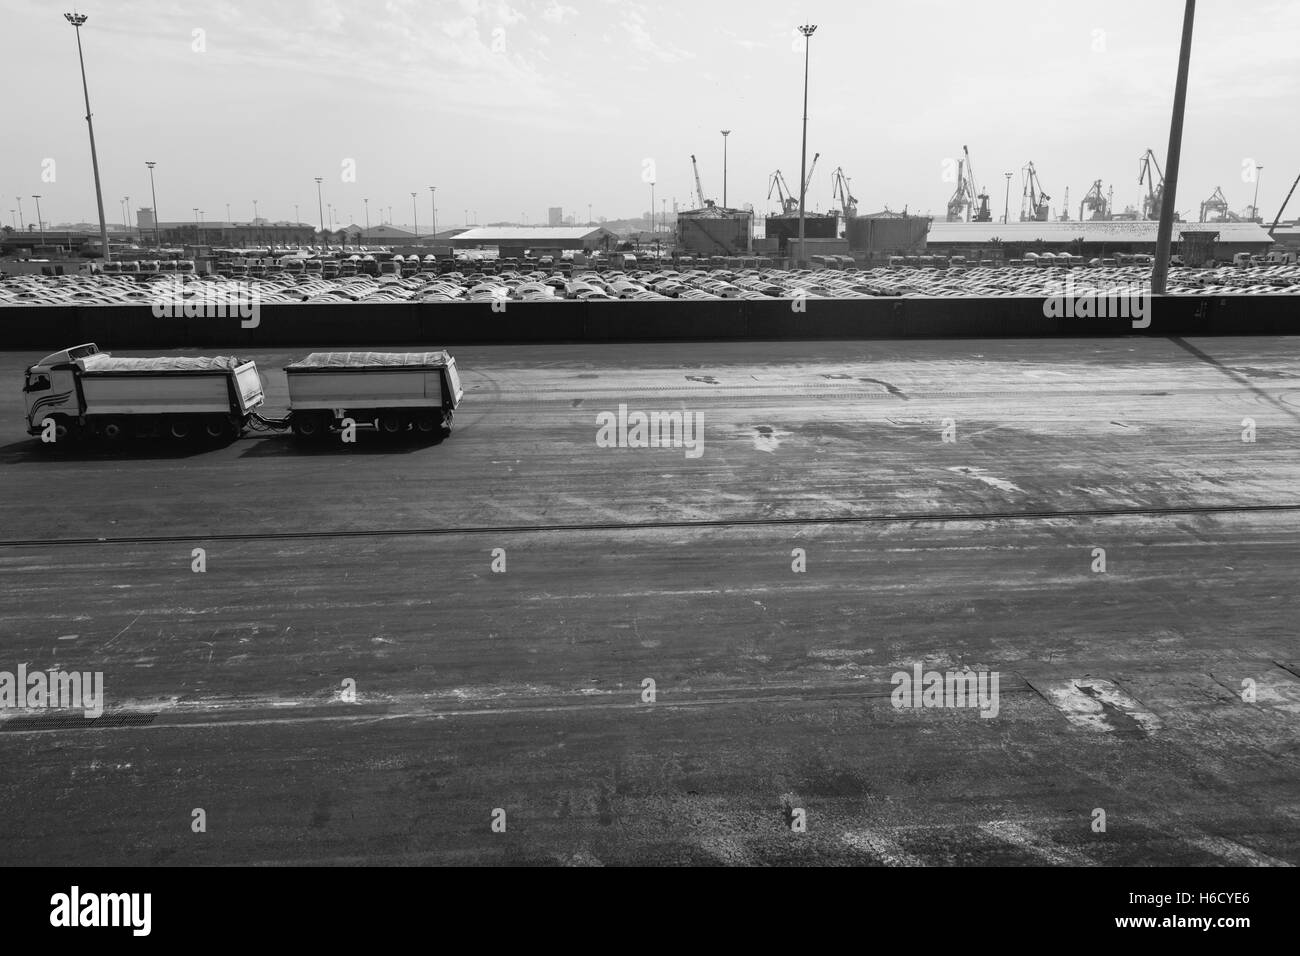 View of a huge car park in a commercial port. Stock Photo